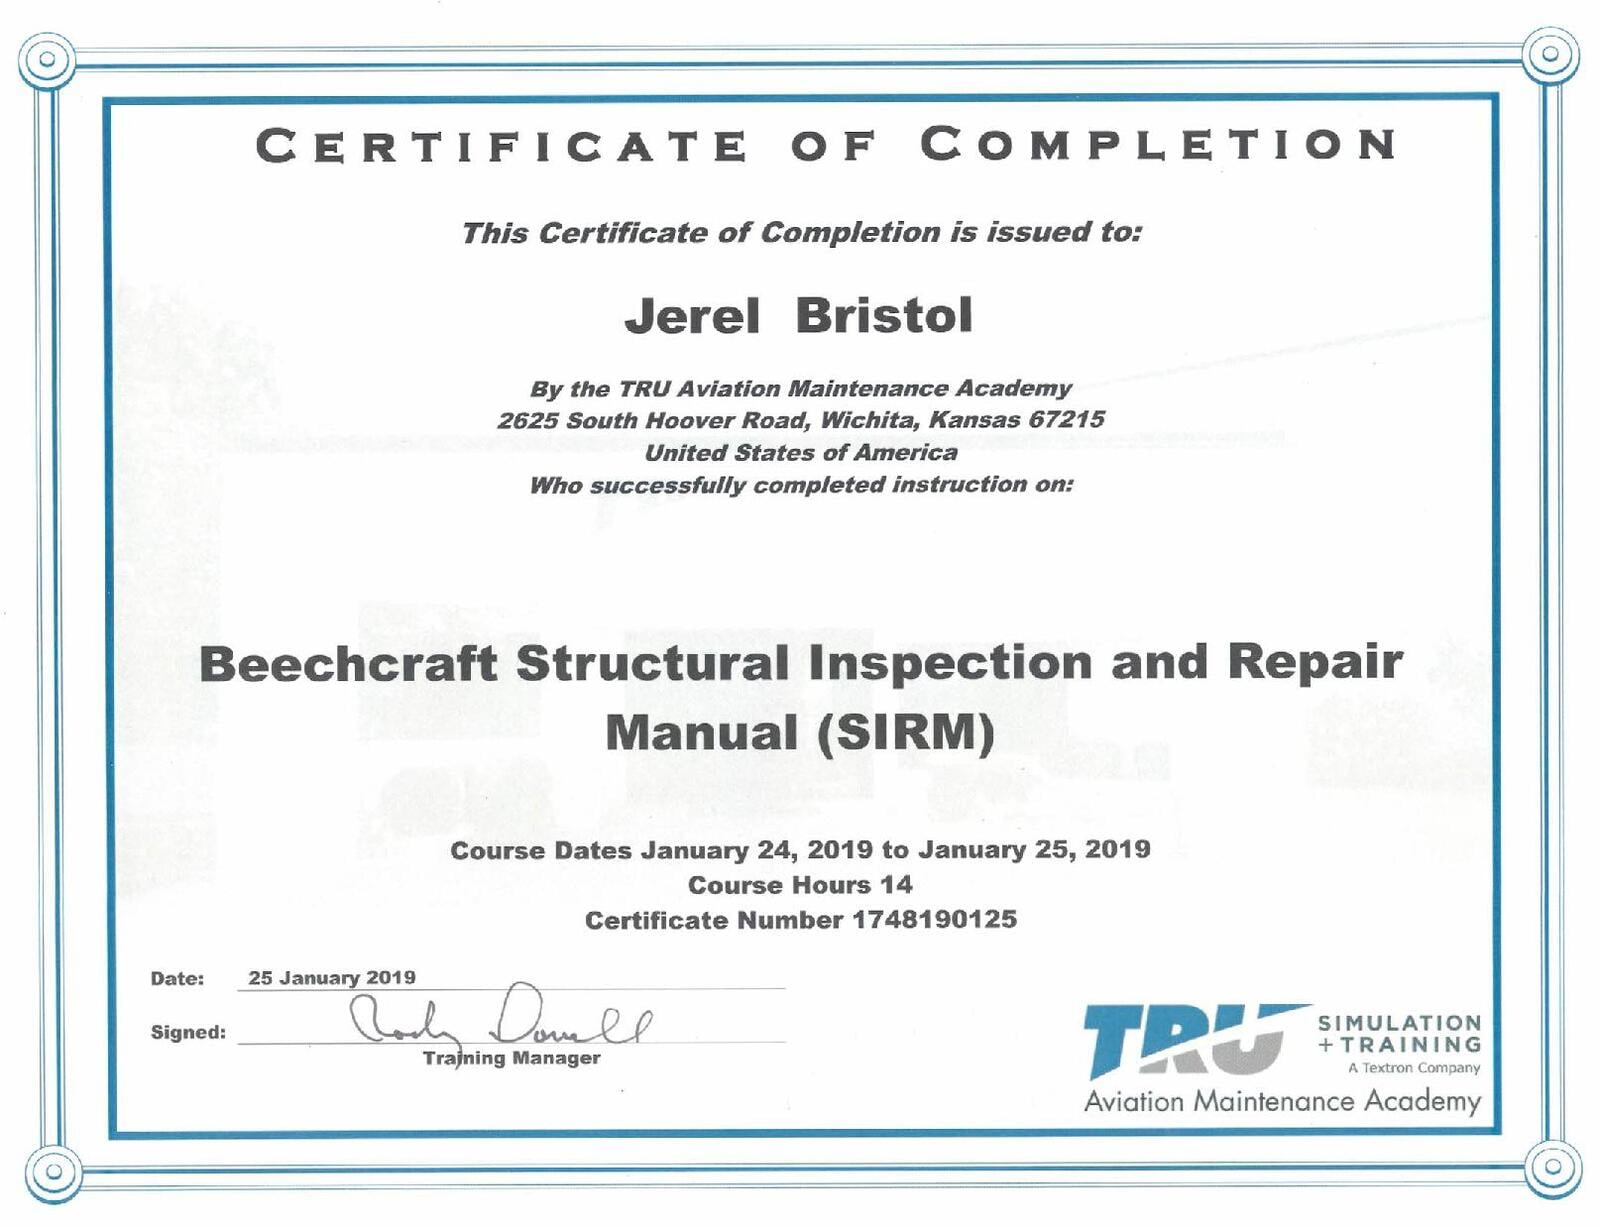  Beechcraft Structural Inspection and Repair Manual (SIRM)